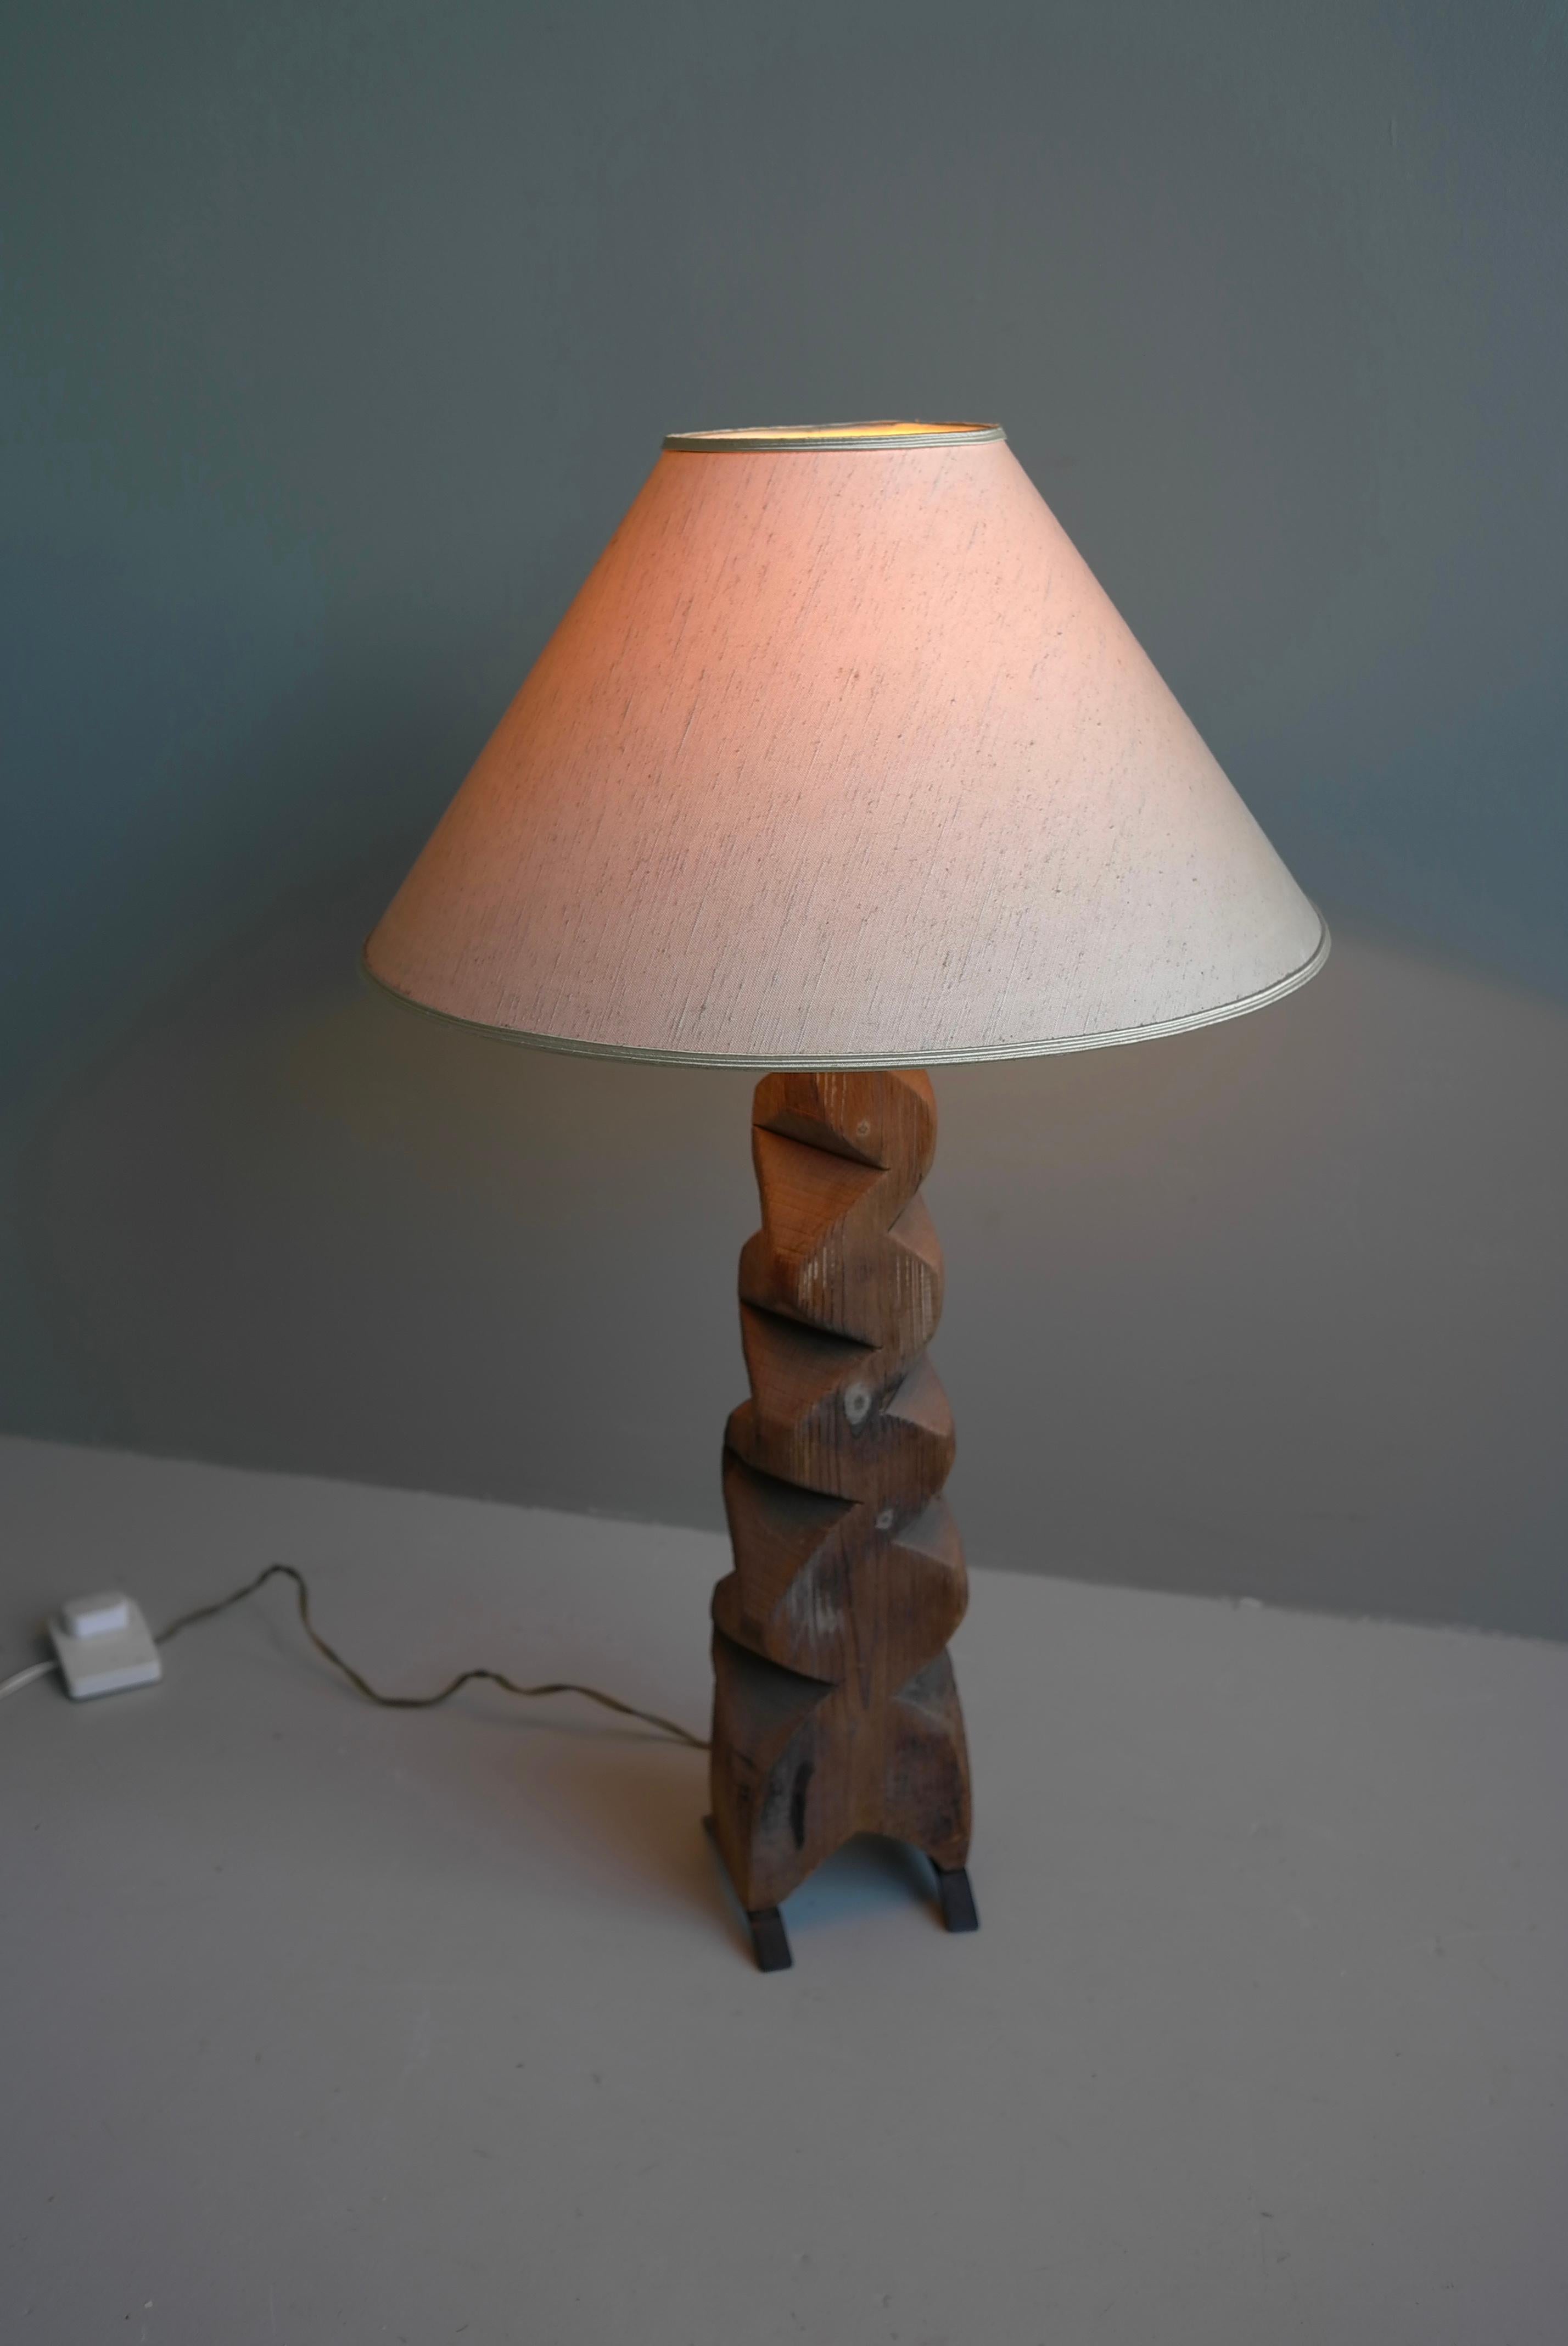 Large Mid-Century Modern Wooden Sculpture Table Lamp, off White Silk Shade, 1965 For Sale 1